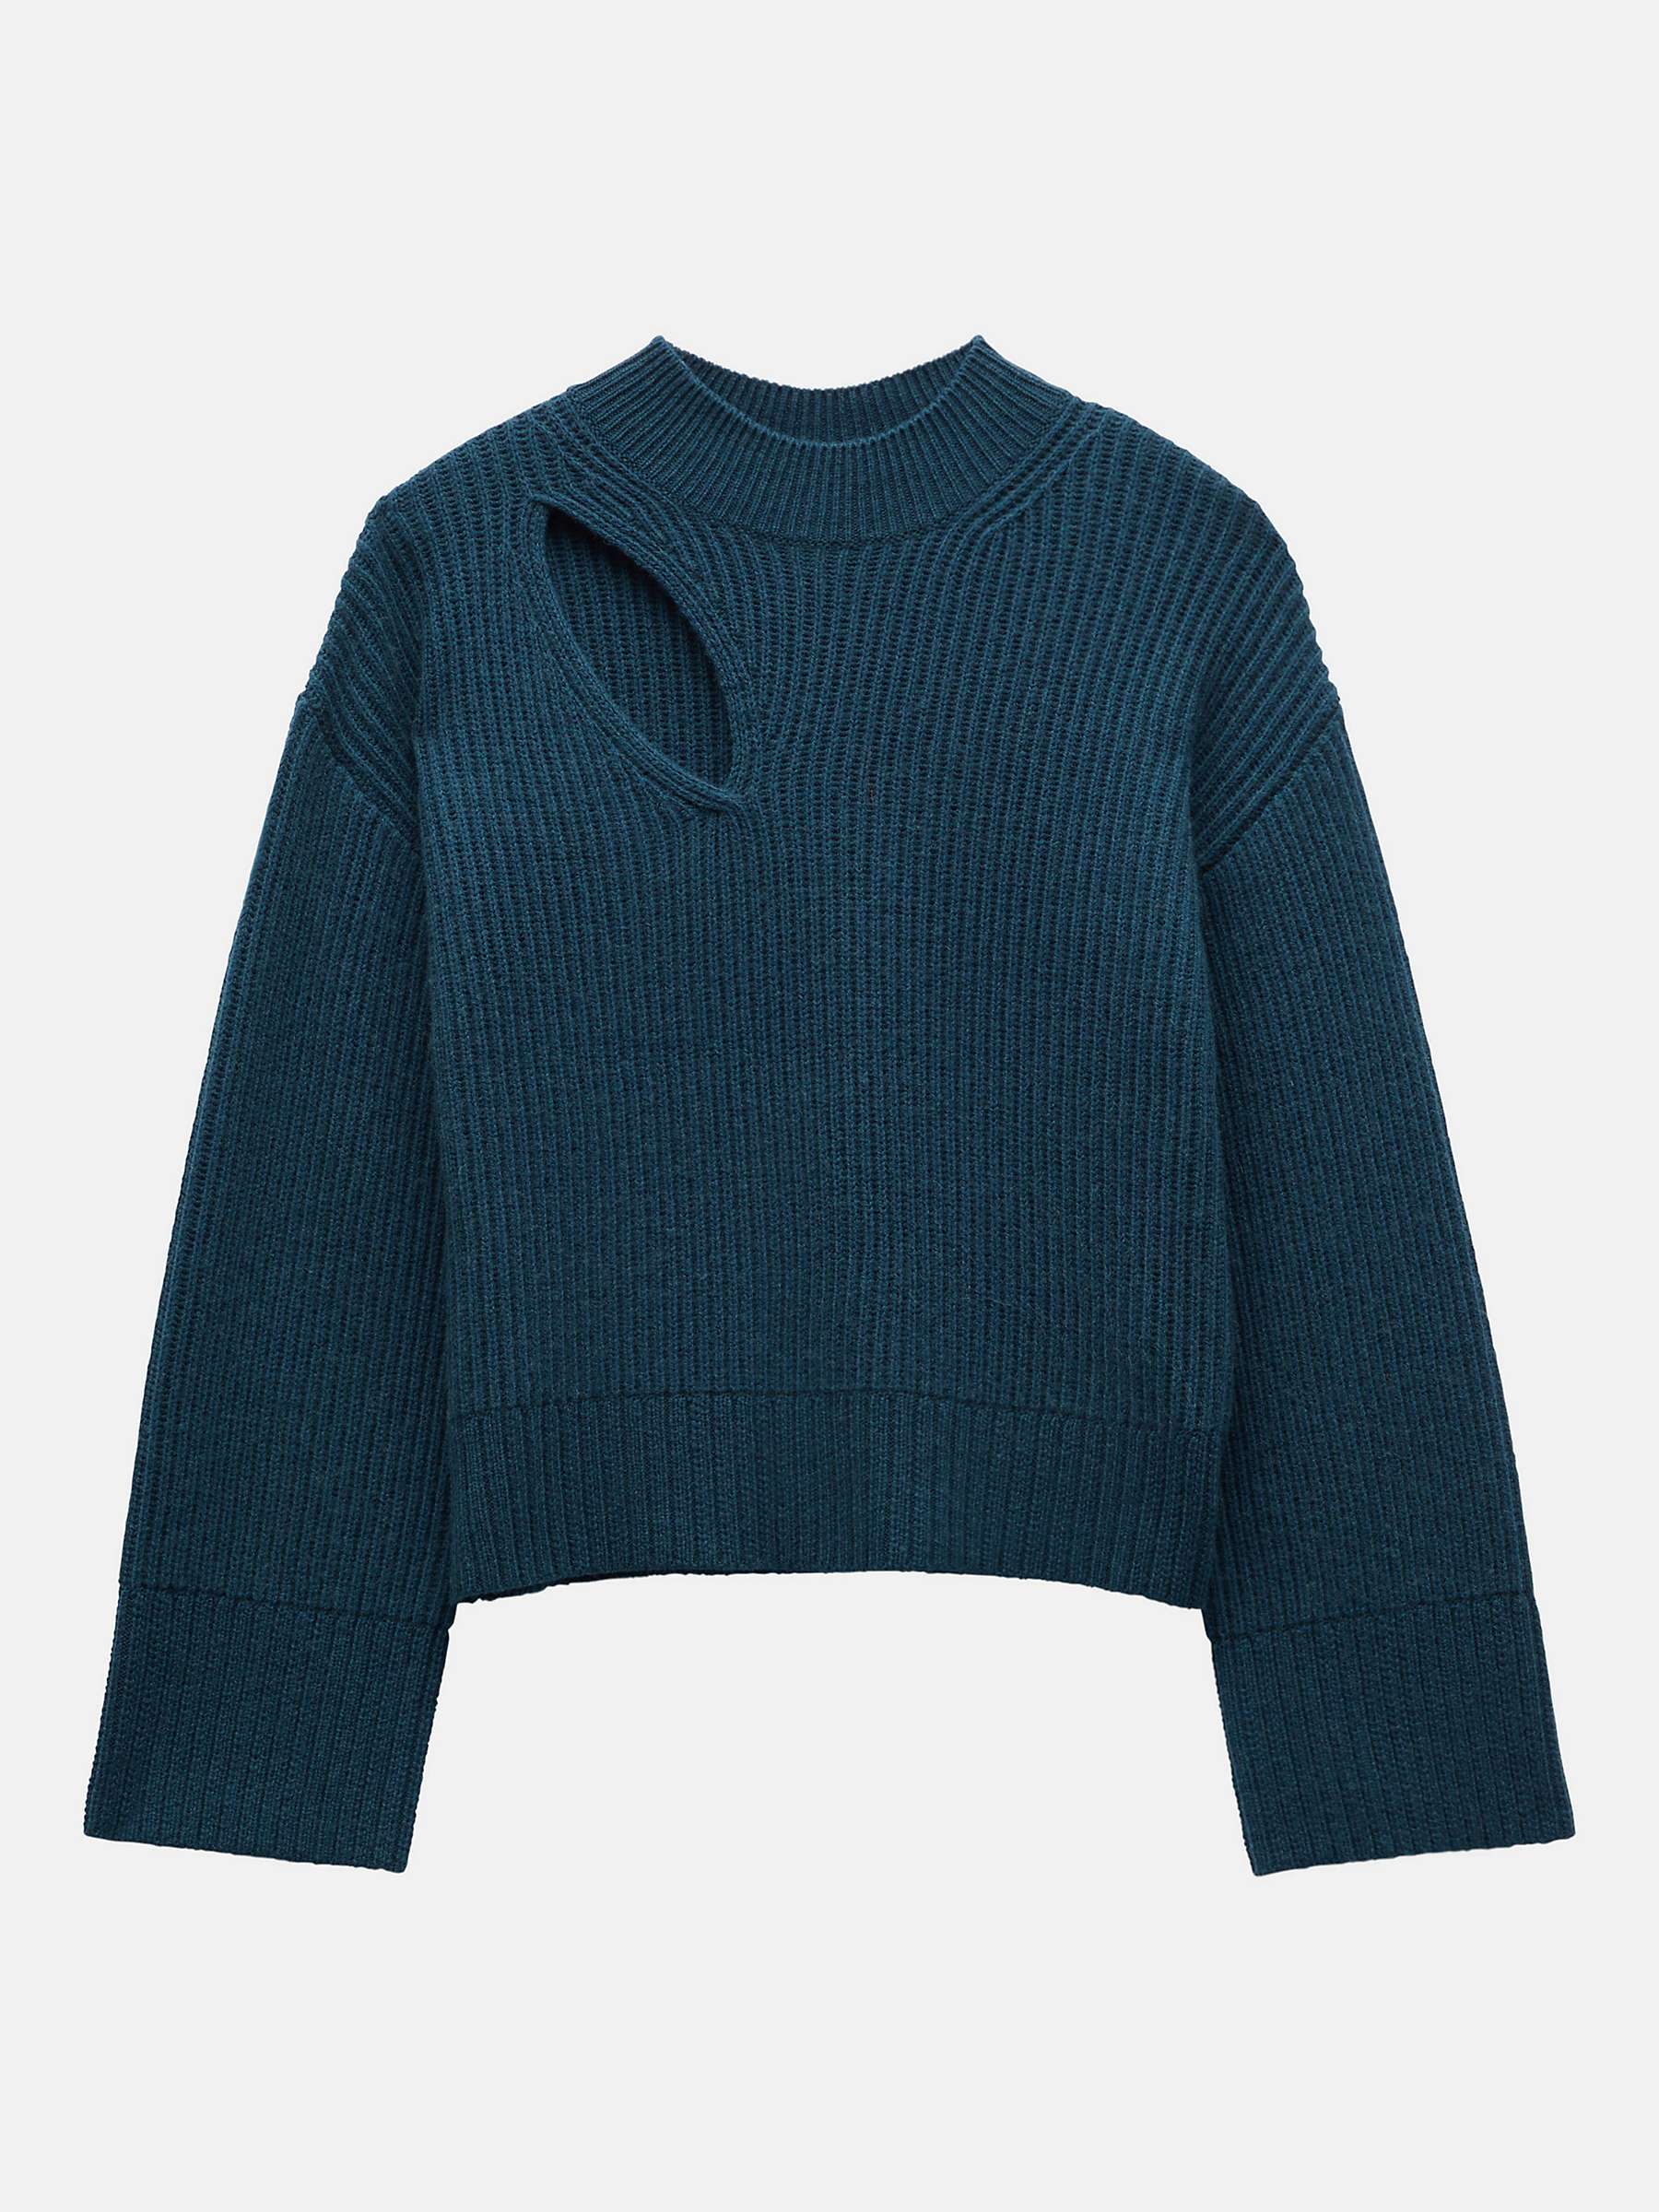 Buy HUSH Shelby Cut Out Detail Rib Knit Jumper, Deep Teal Online at johnlewis.com